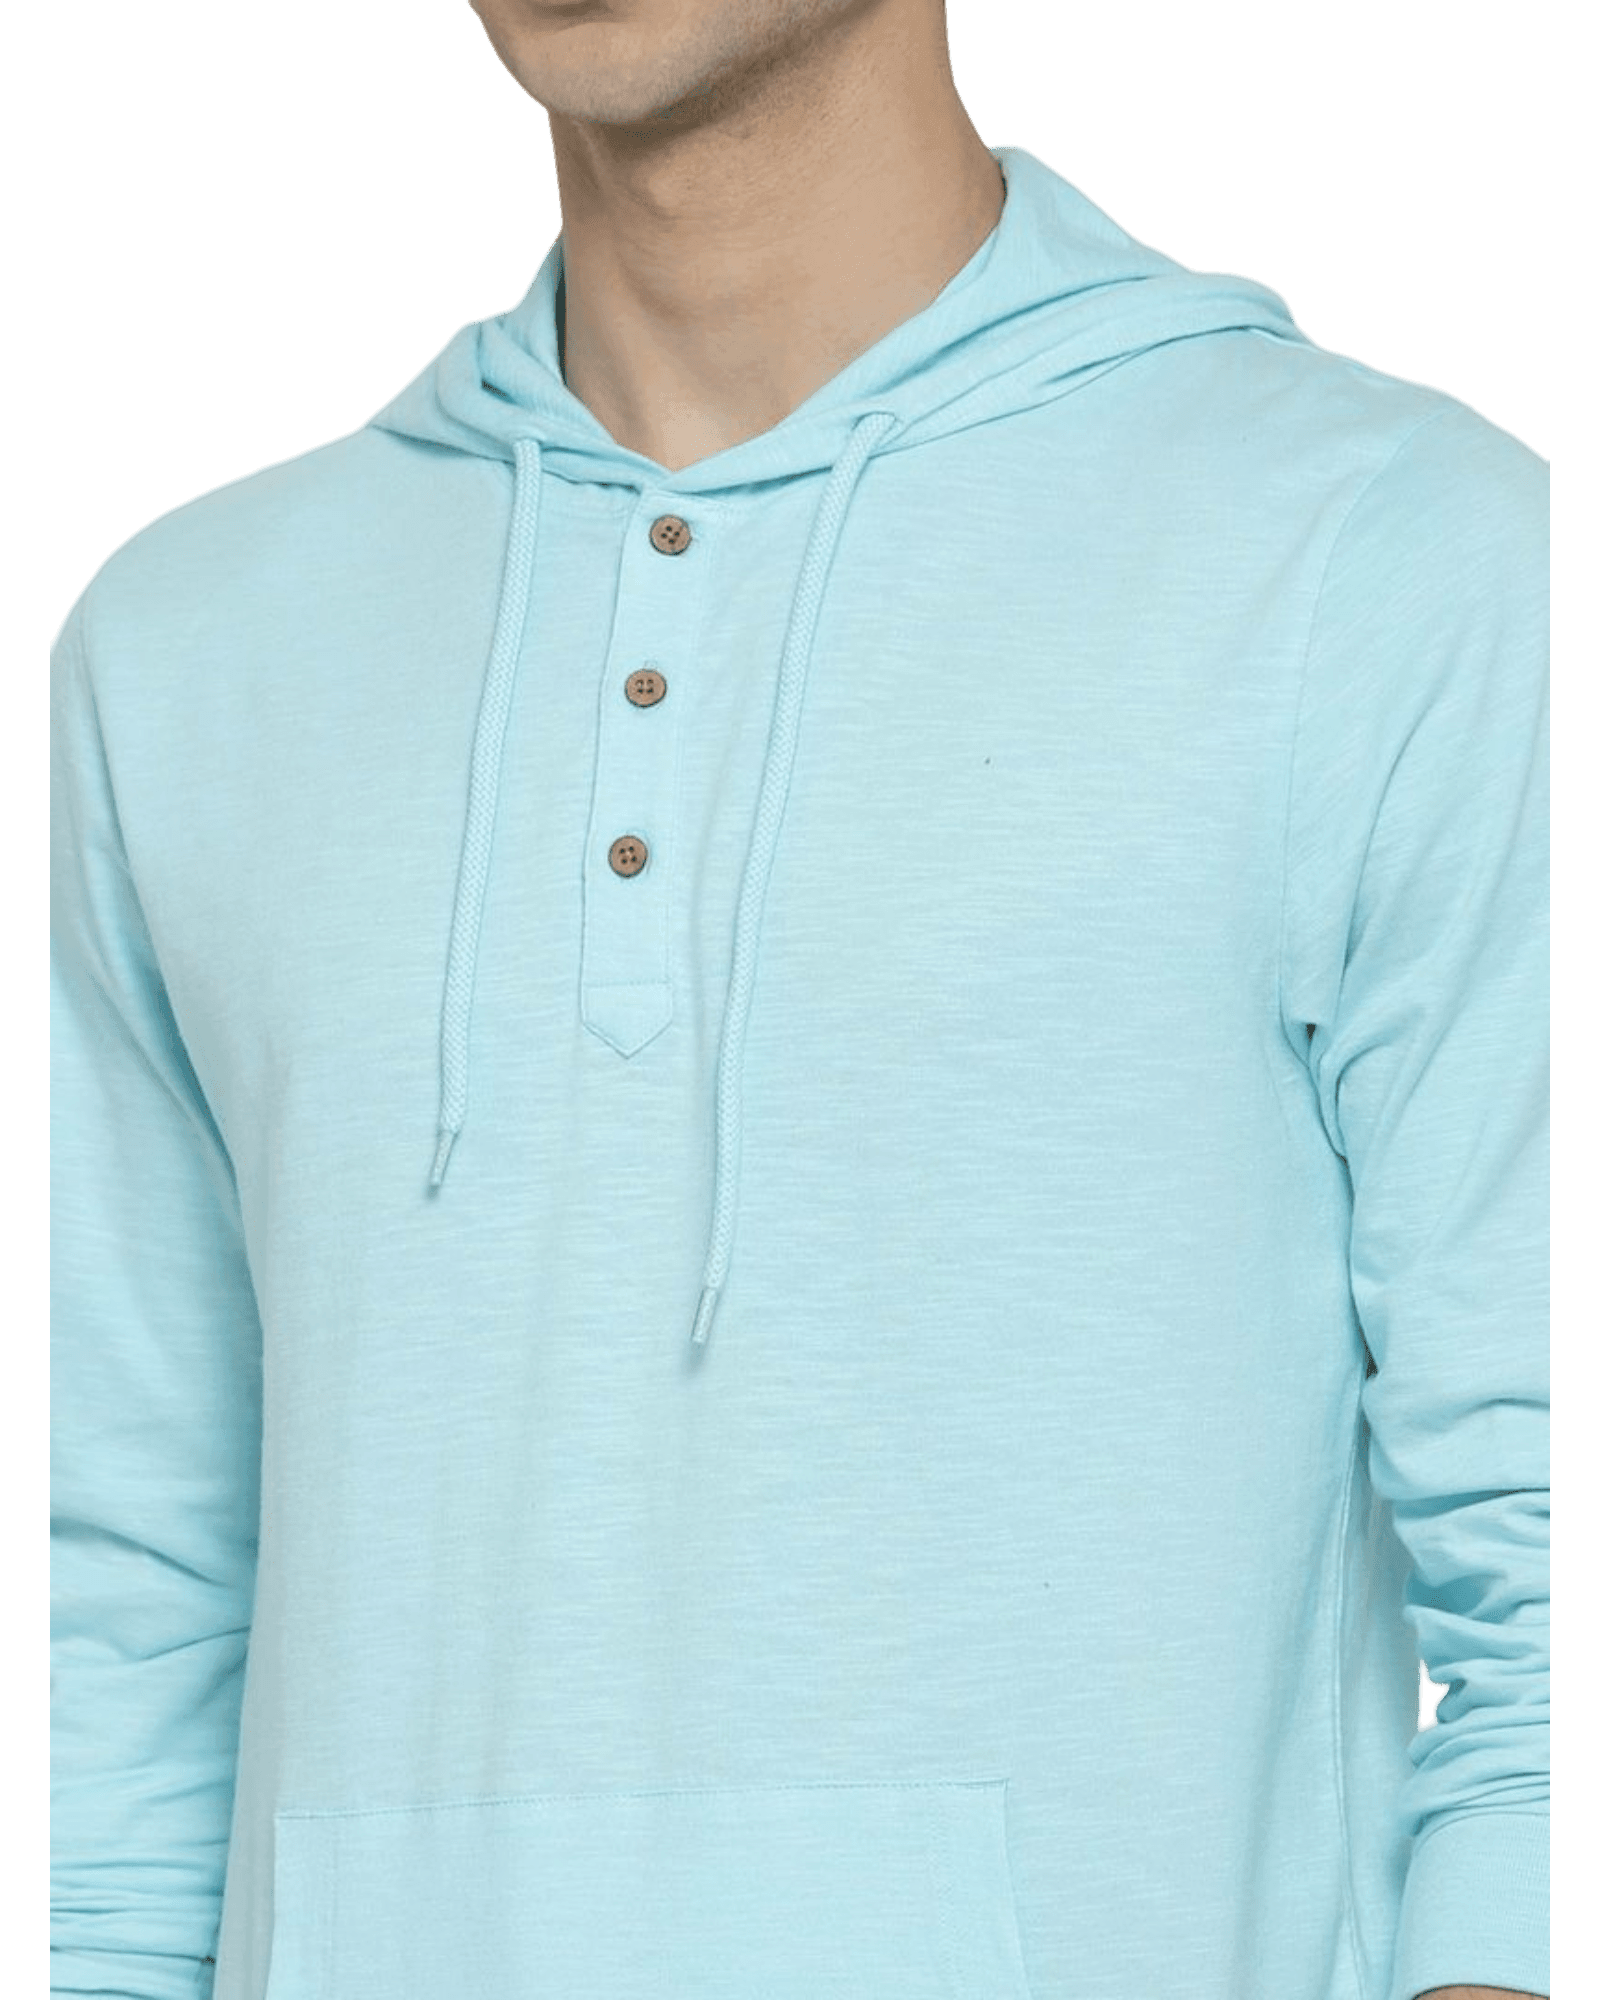 Slim Fit Hooded T-Shirt with Kangaroo Pockets - Apparel For Less